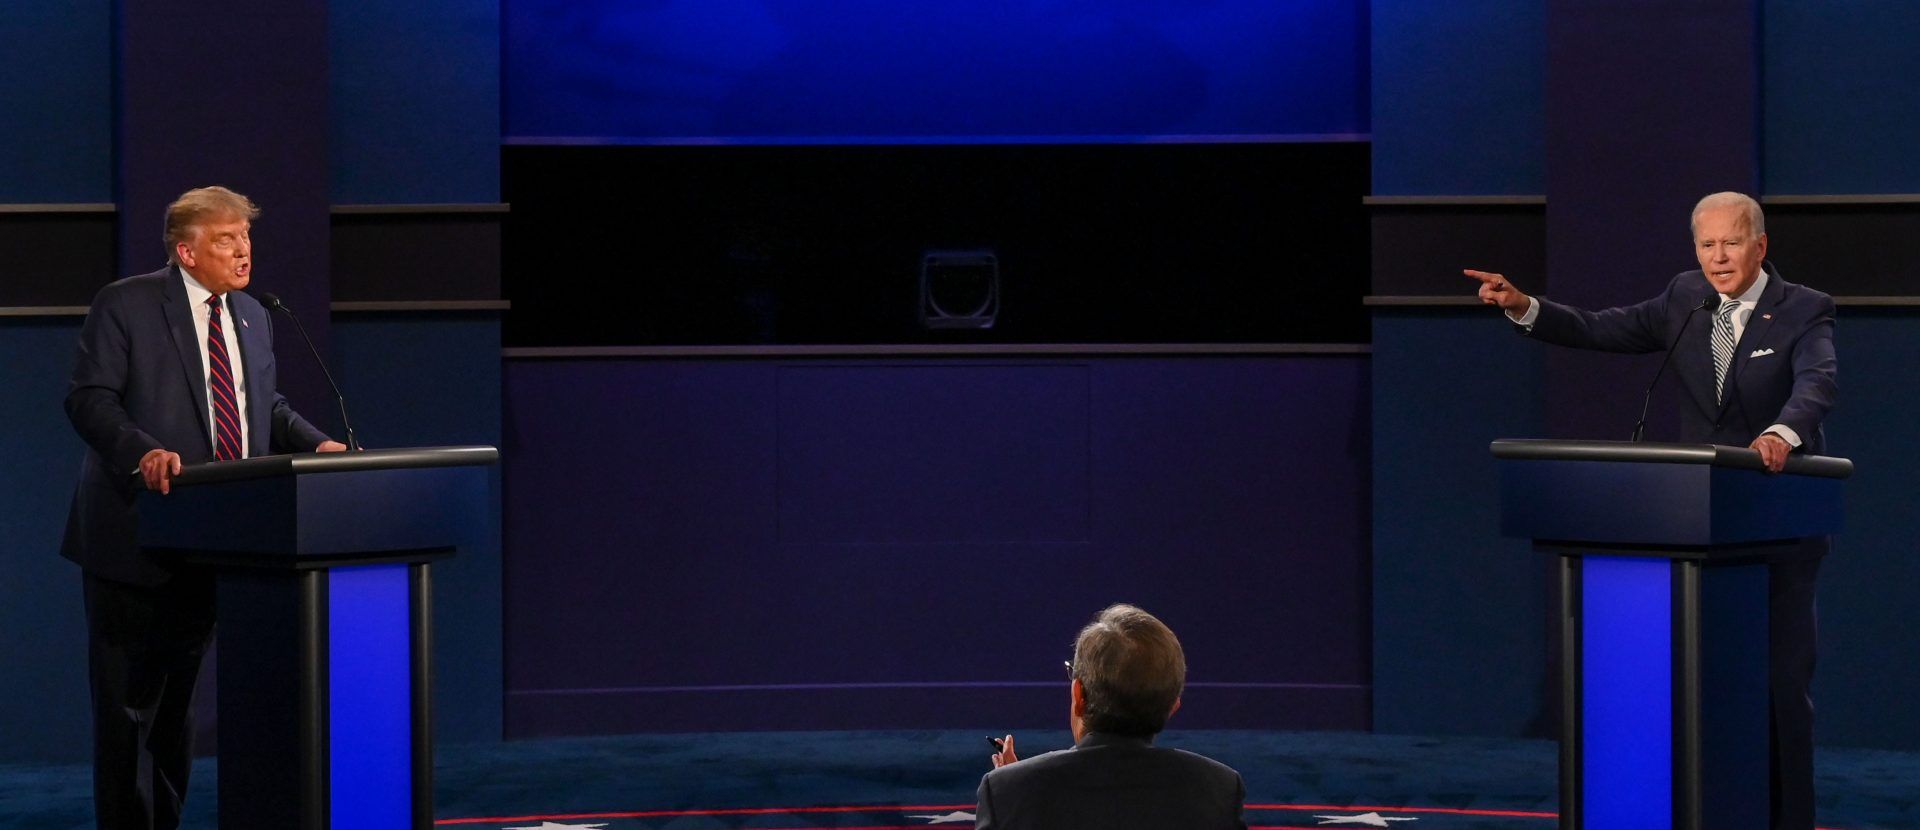 First Trump Biden Debate Ends With Many Insults, Little Substance